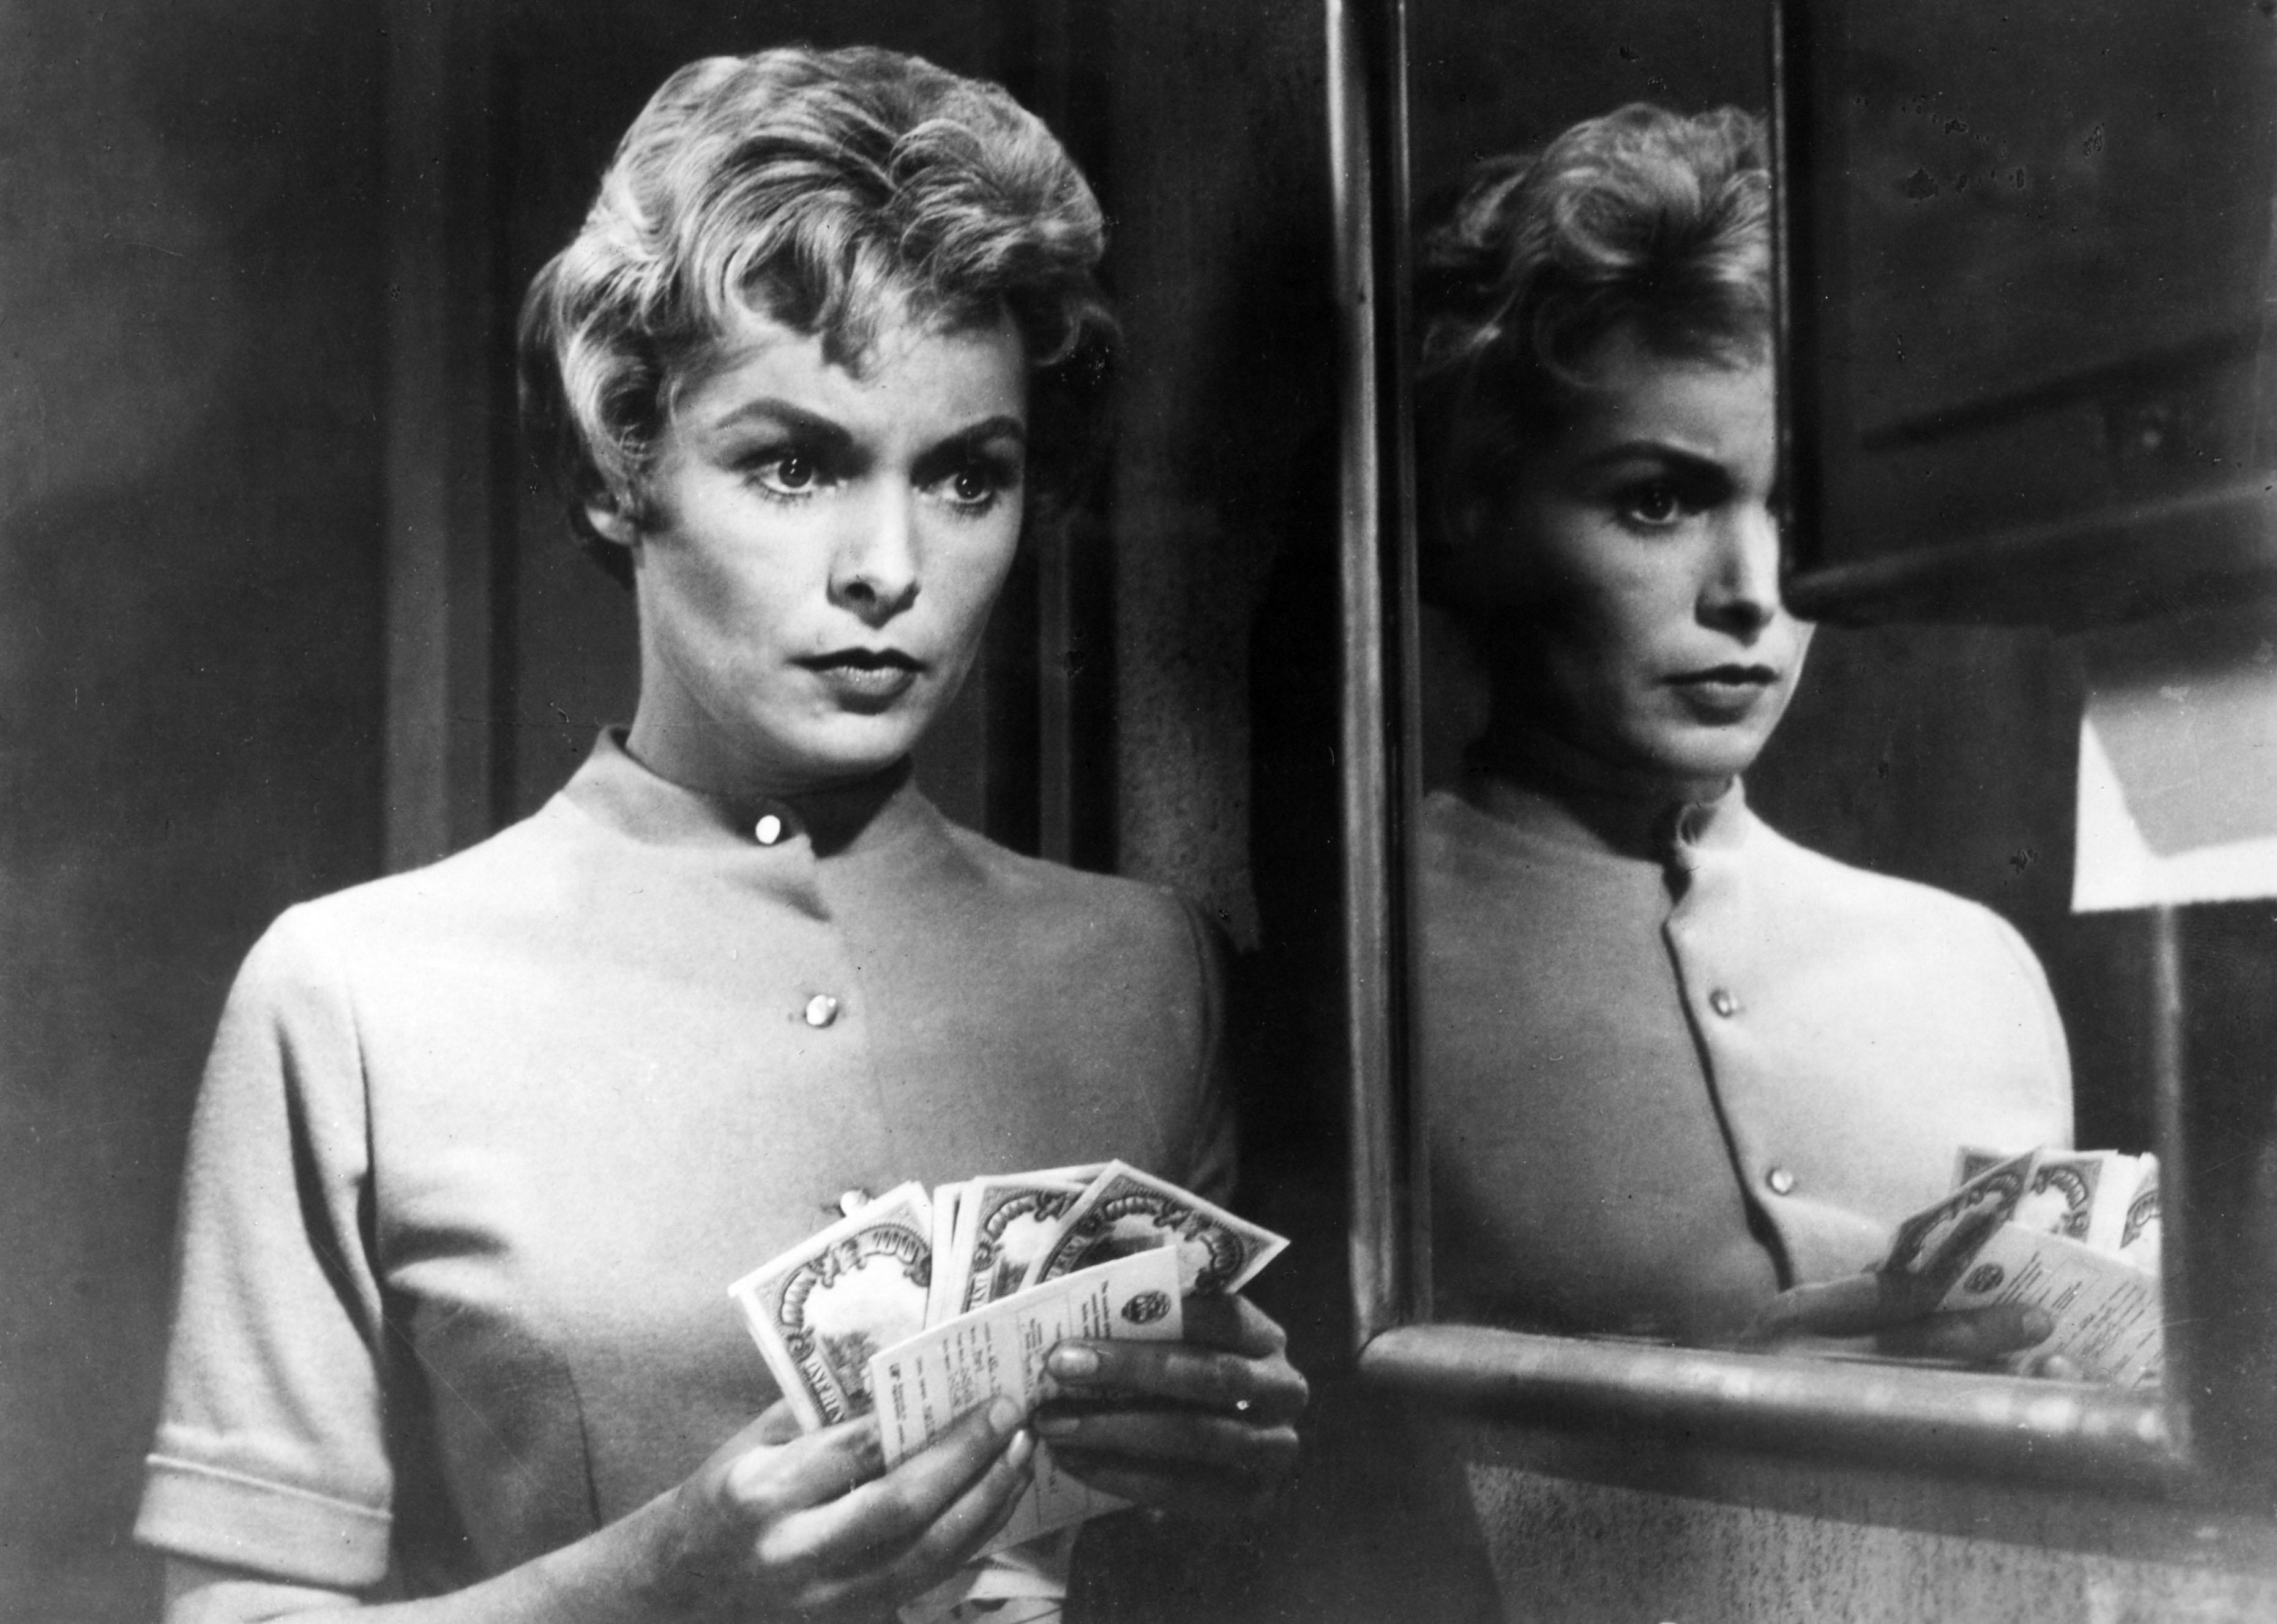 Janet Leigh in a scene from the film Psycho.